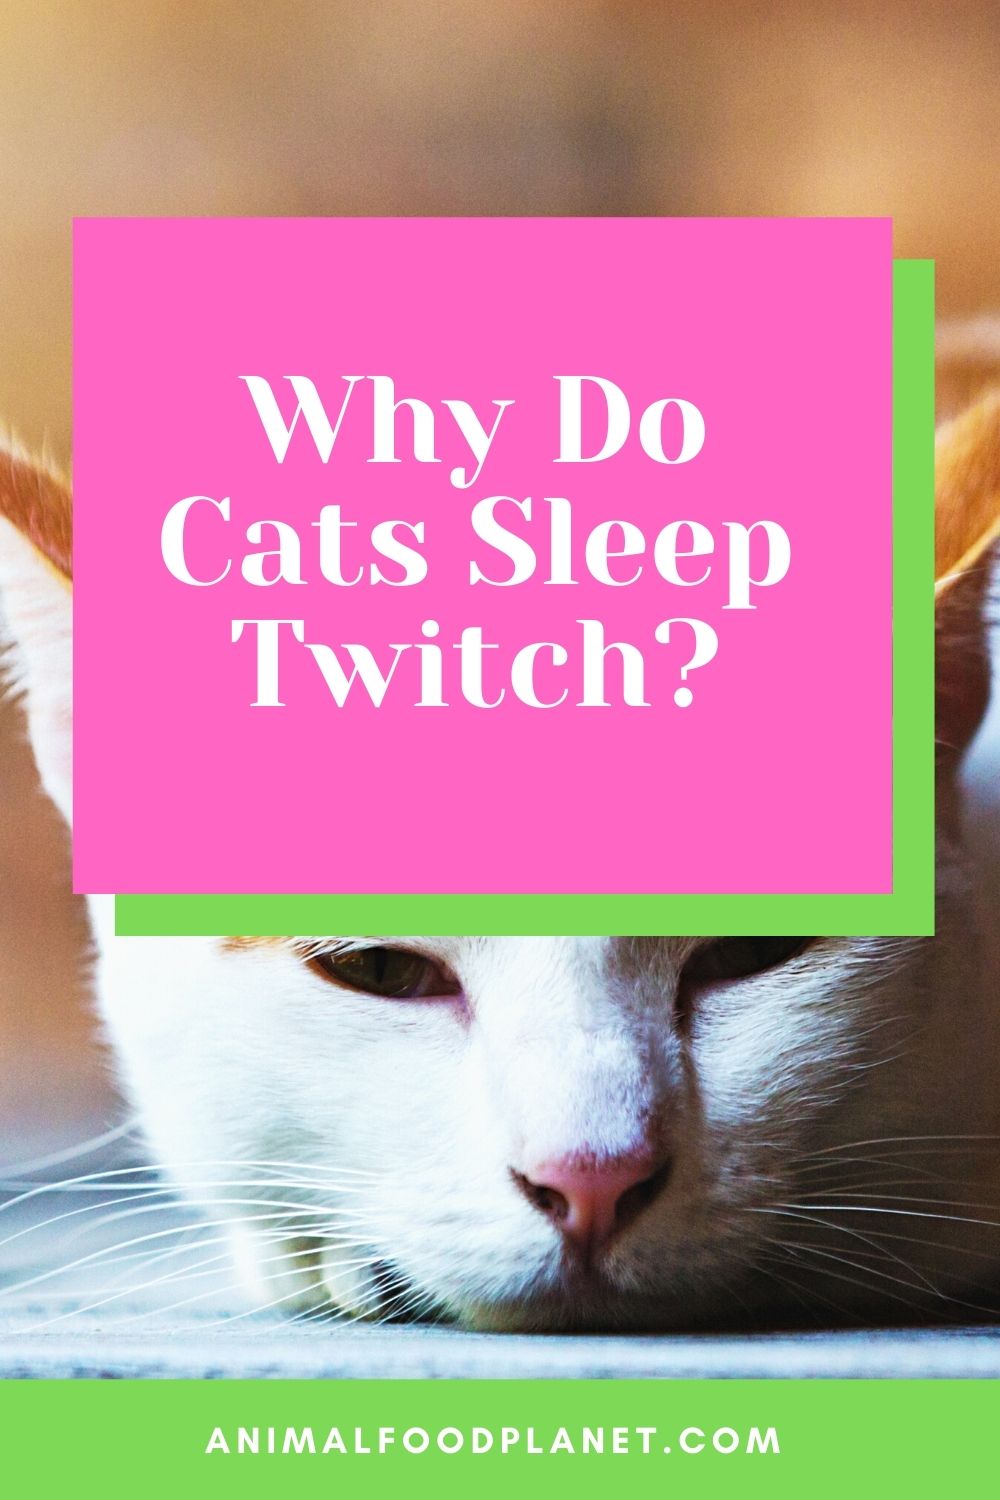 Why Do Cats Twitch in Their Sleep